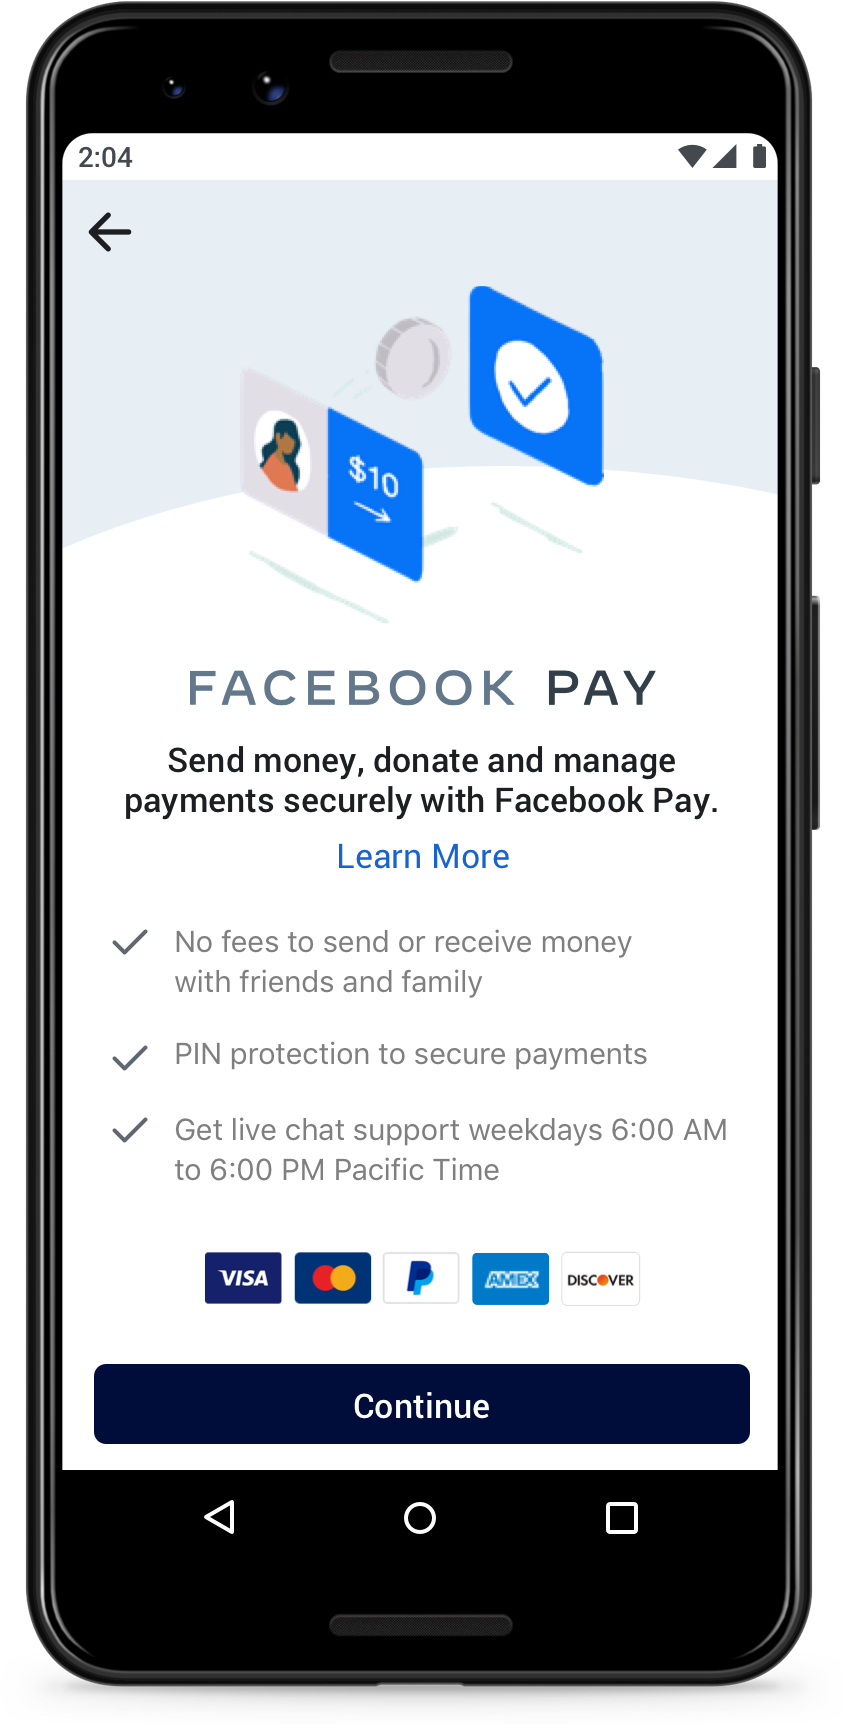 Simplifying Payments with Facebook Pay - About Facebook